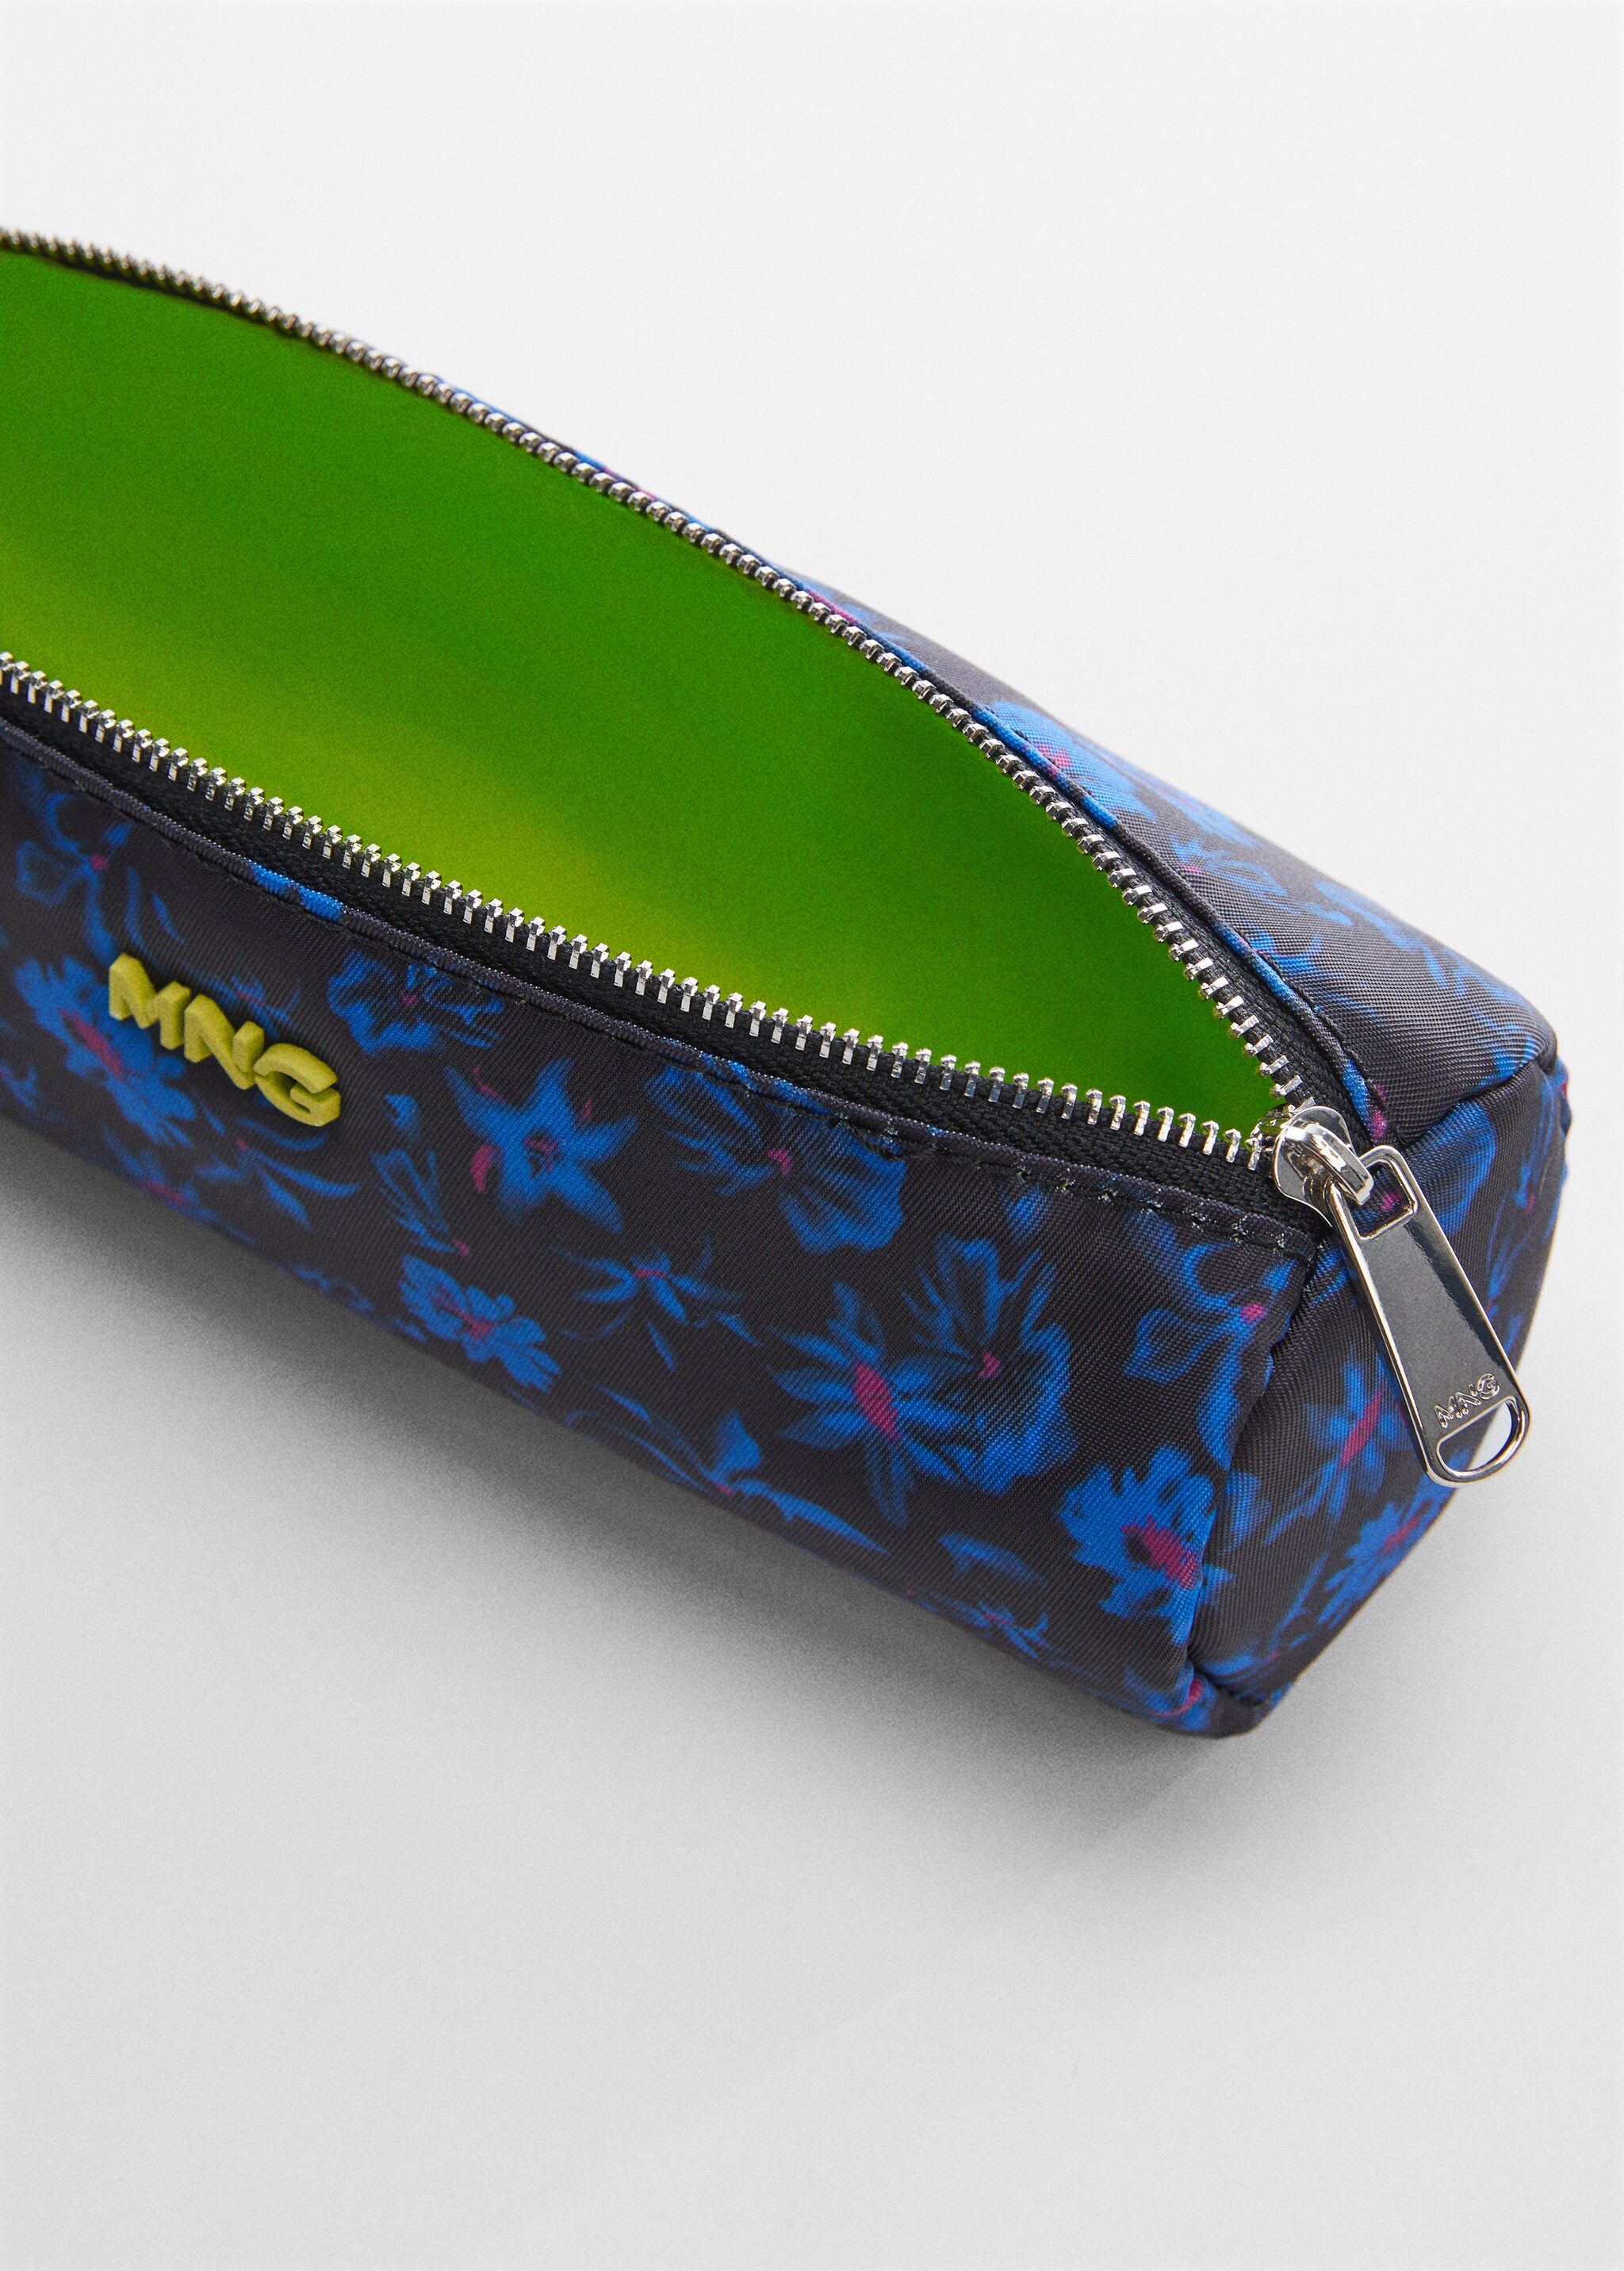 Logo zipped pencil case - Details of the article 1